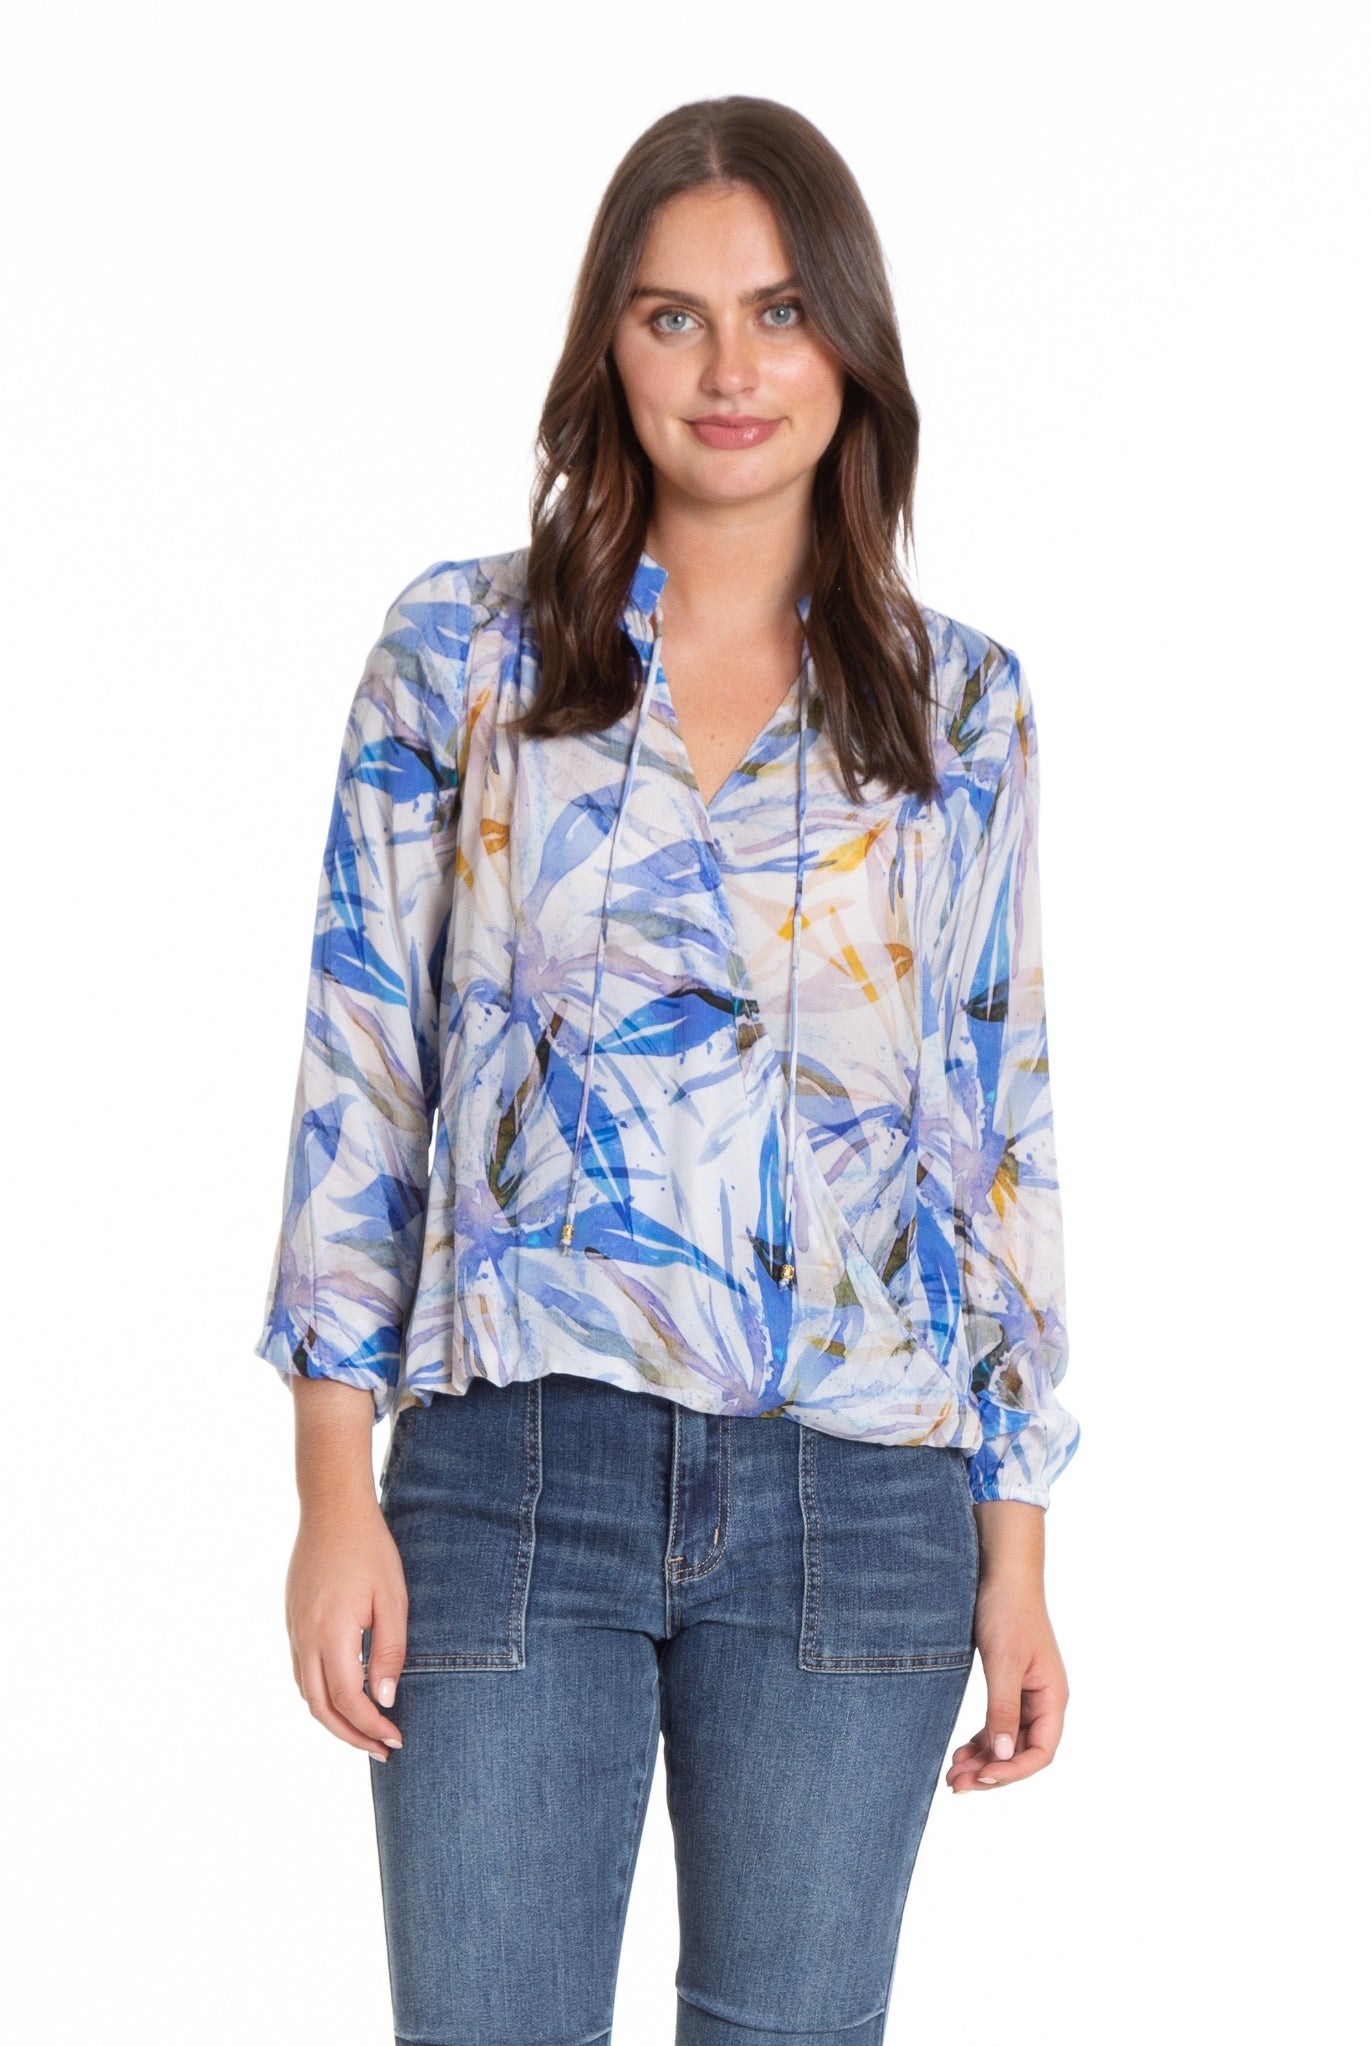 Hand Painted Abstract Floral - Crossover Top with Tassel Front APNY